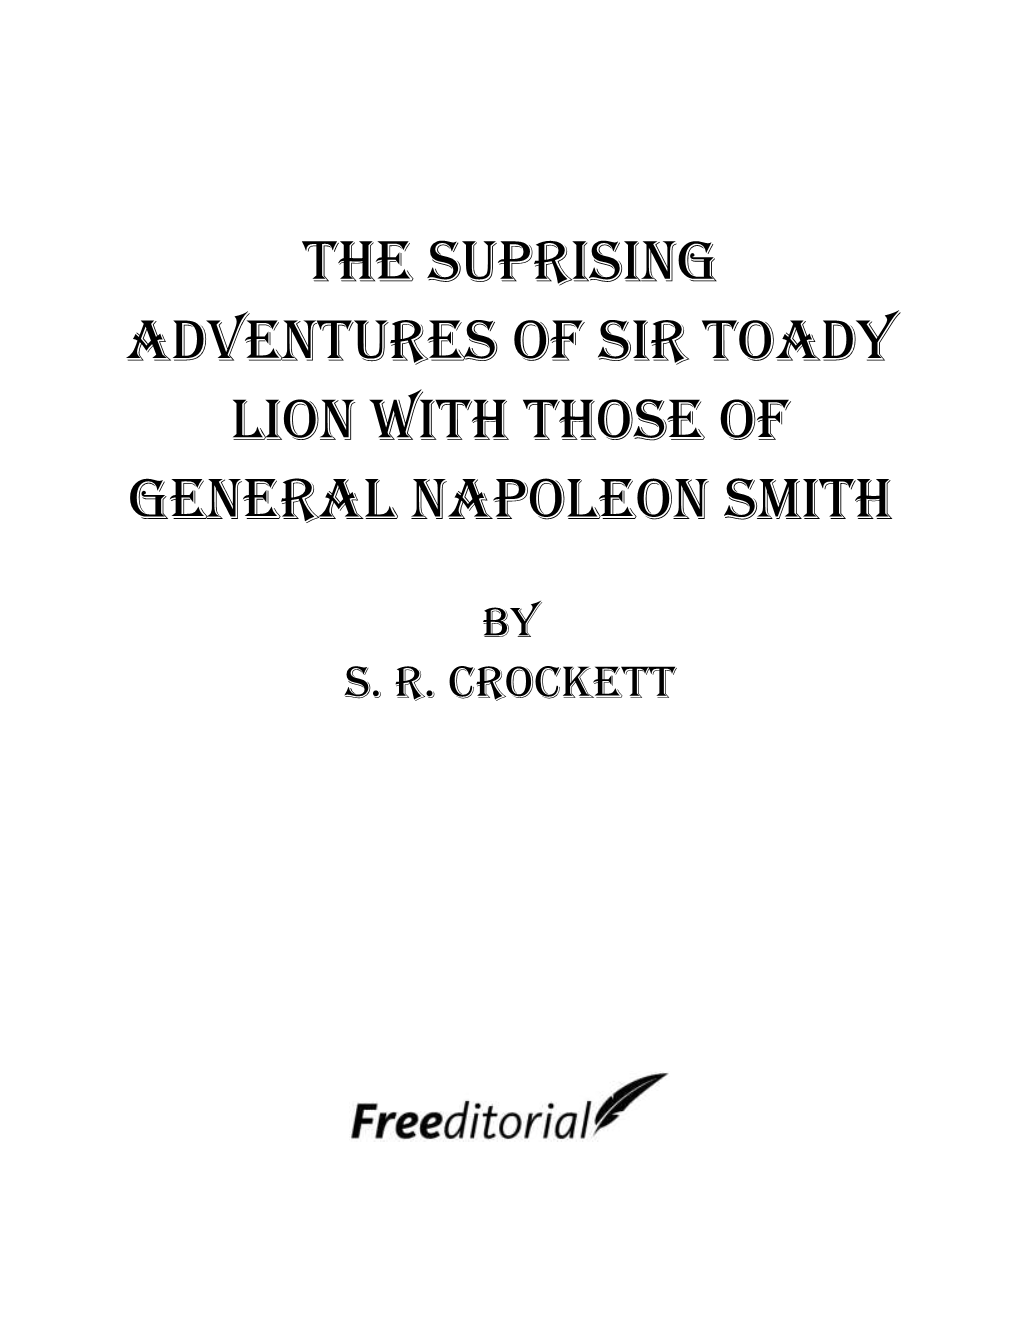 The Suprising Adventures of Sir Toady Lion with Those of General Napoleon Smith